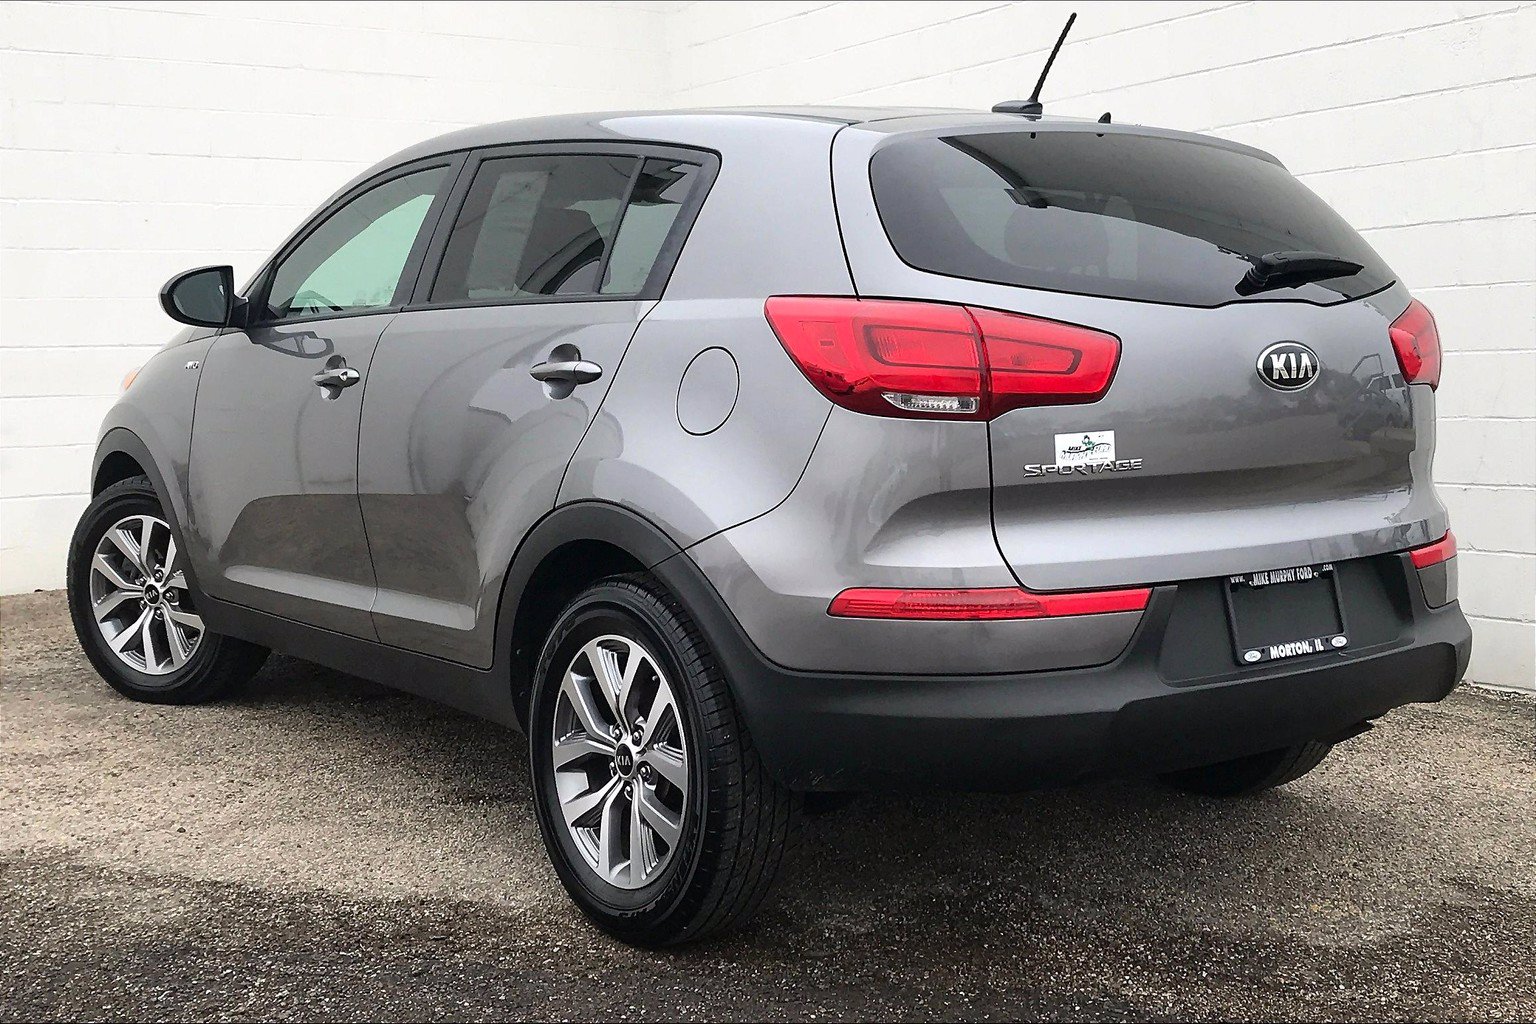 PreOwned 2016 Kia Sportage AWD 4dr LX 4D Sport Utility in